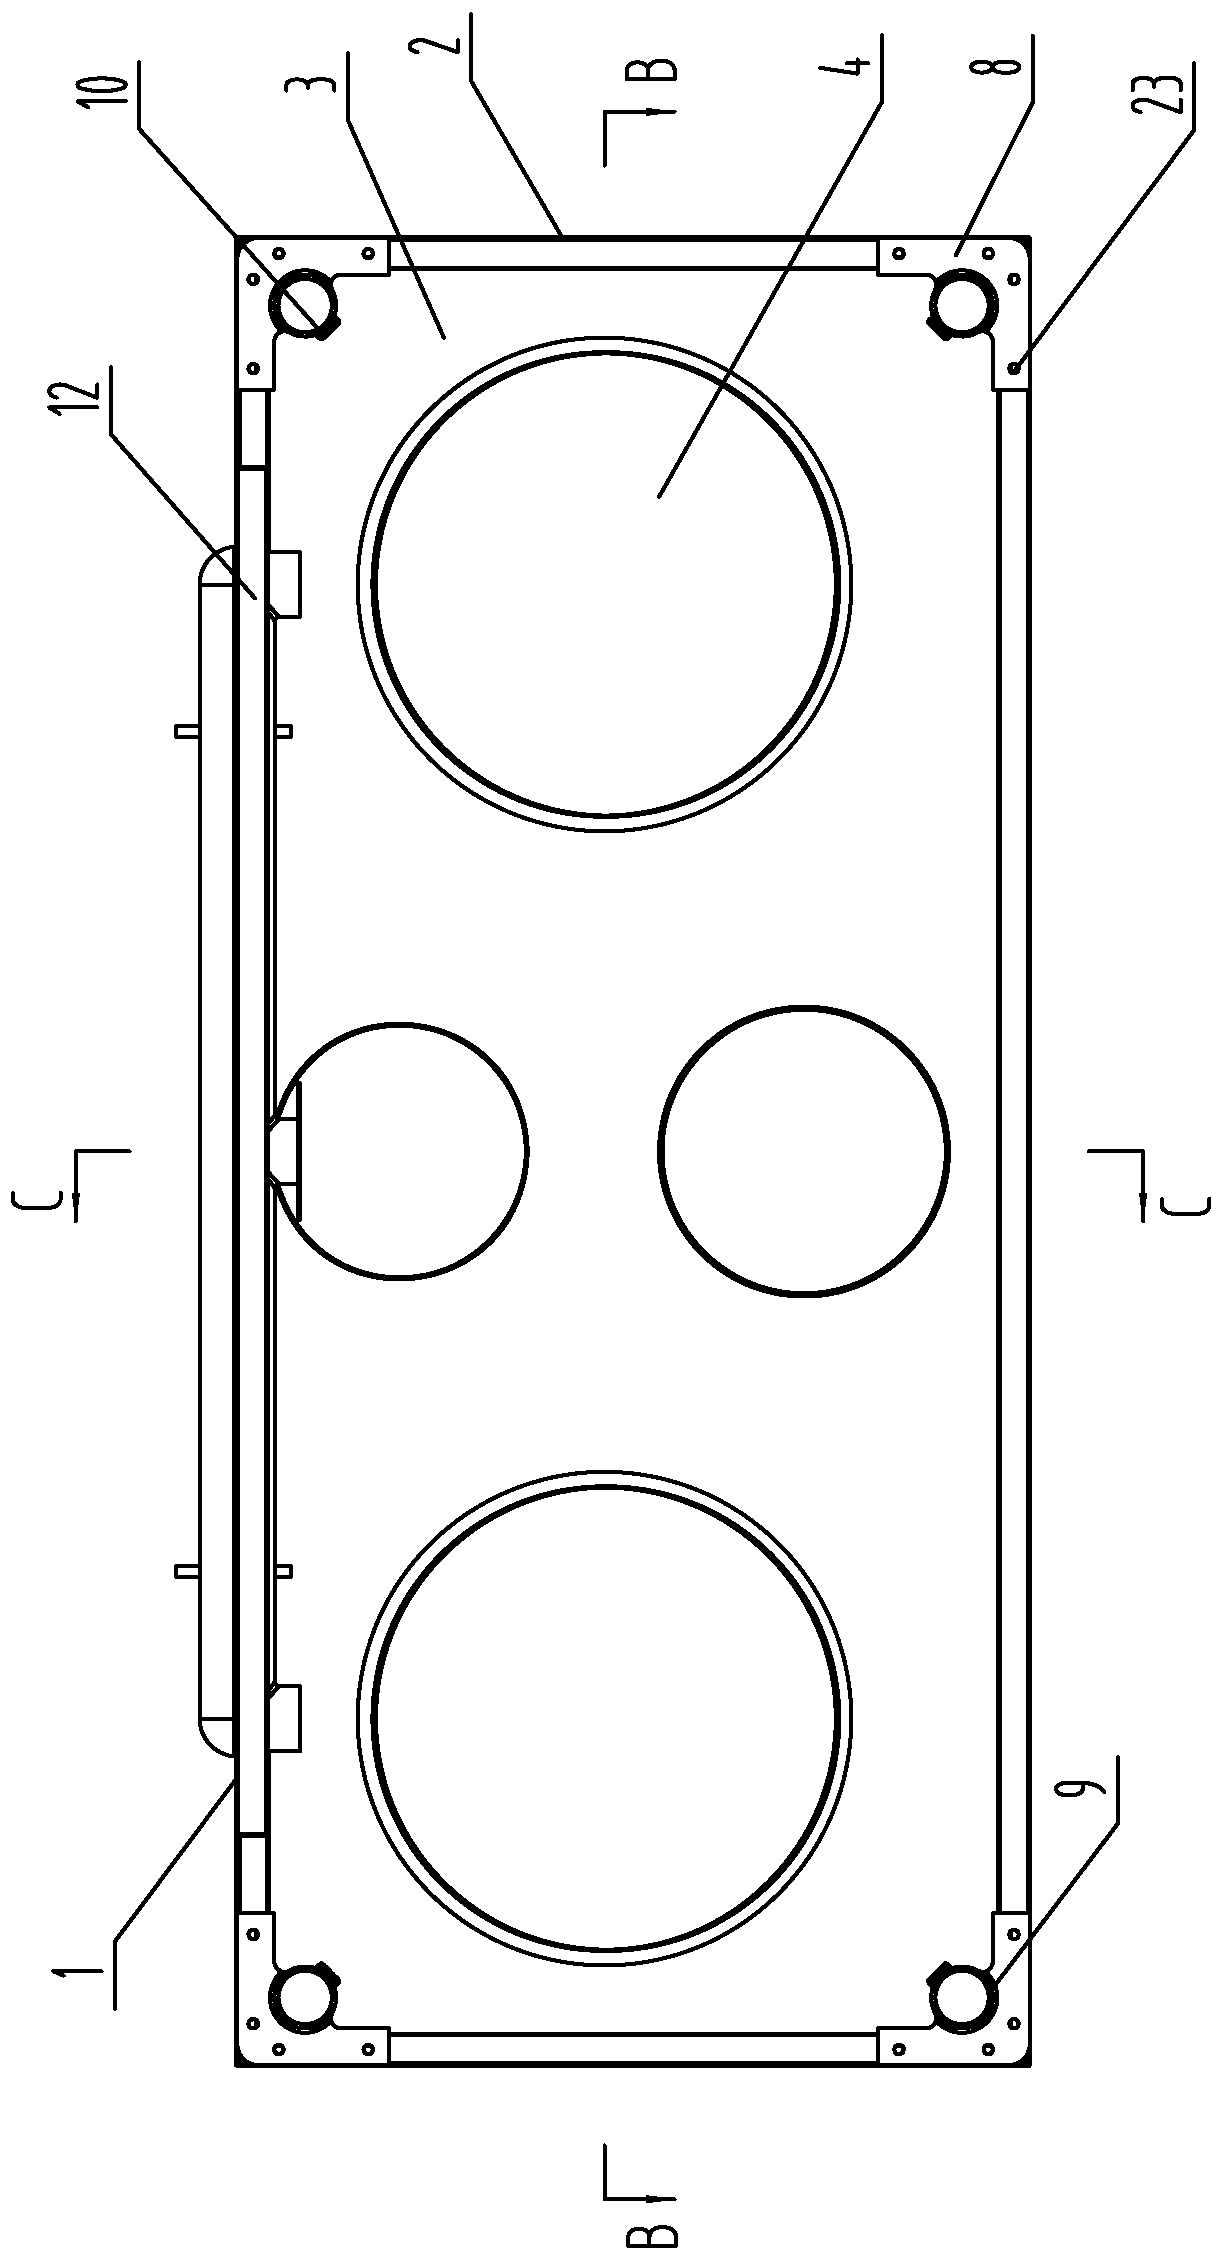 A commercial gas hob and its preparation process